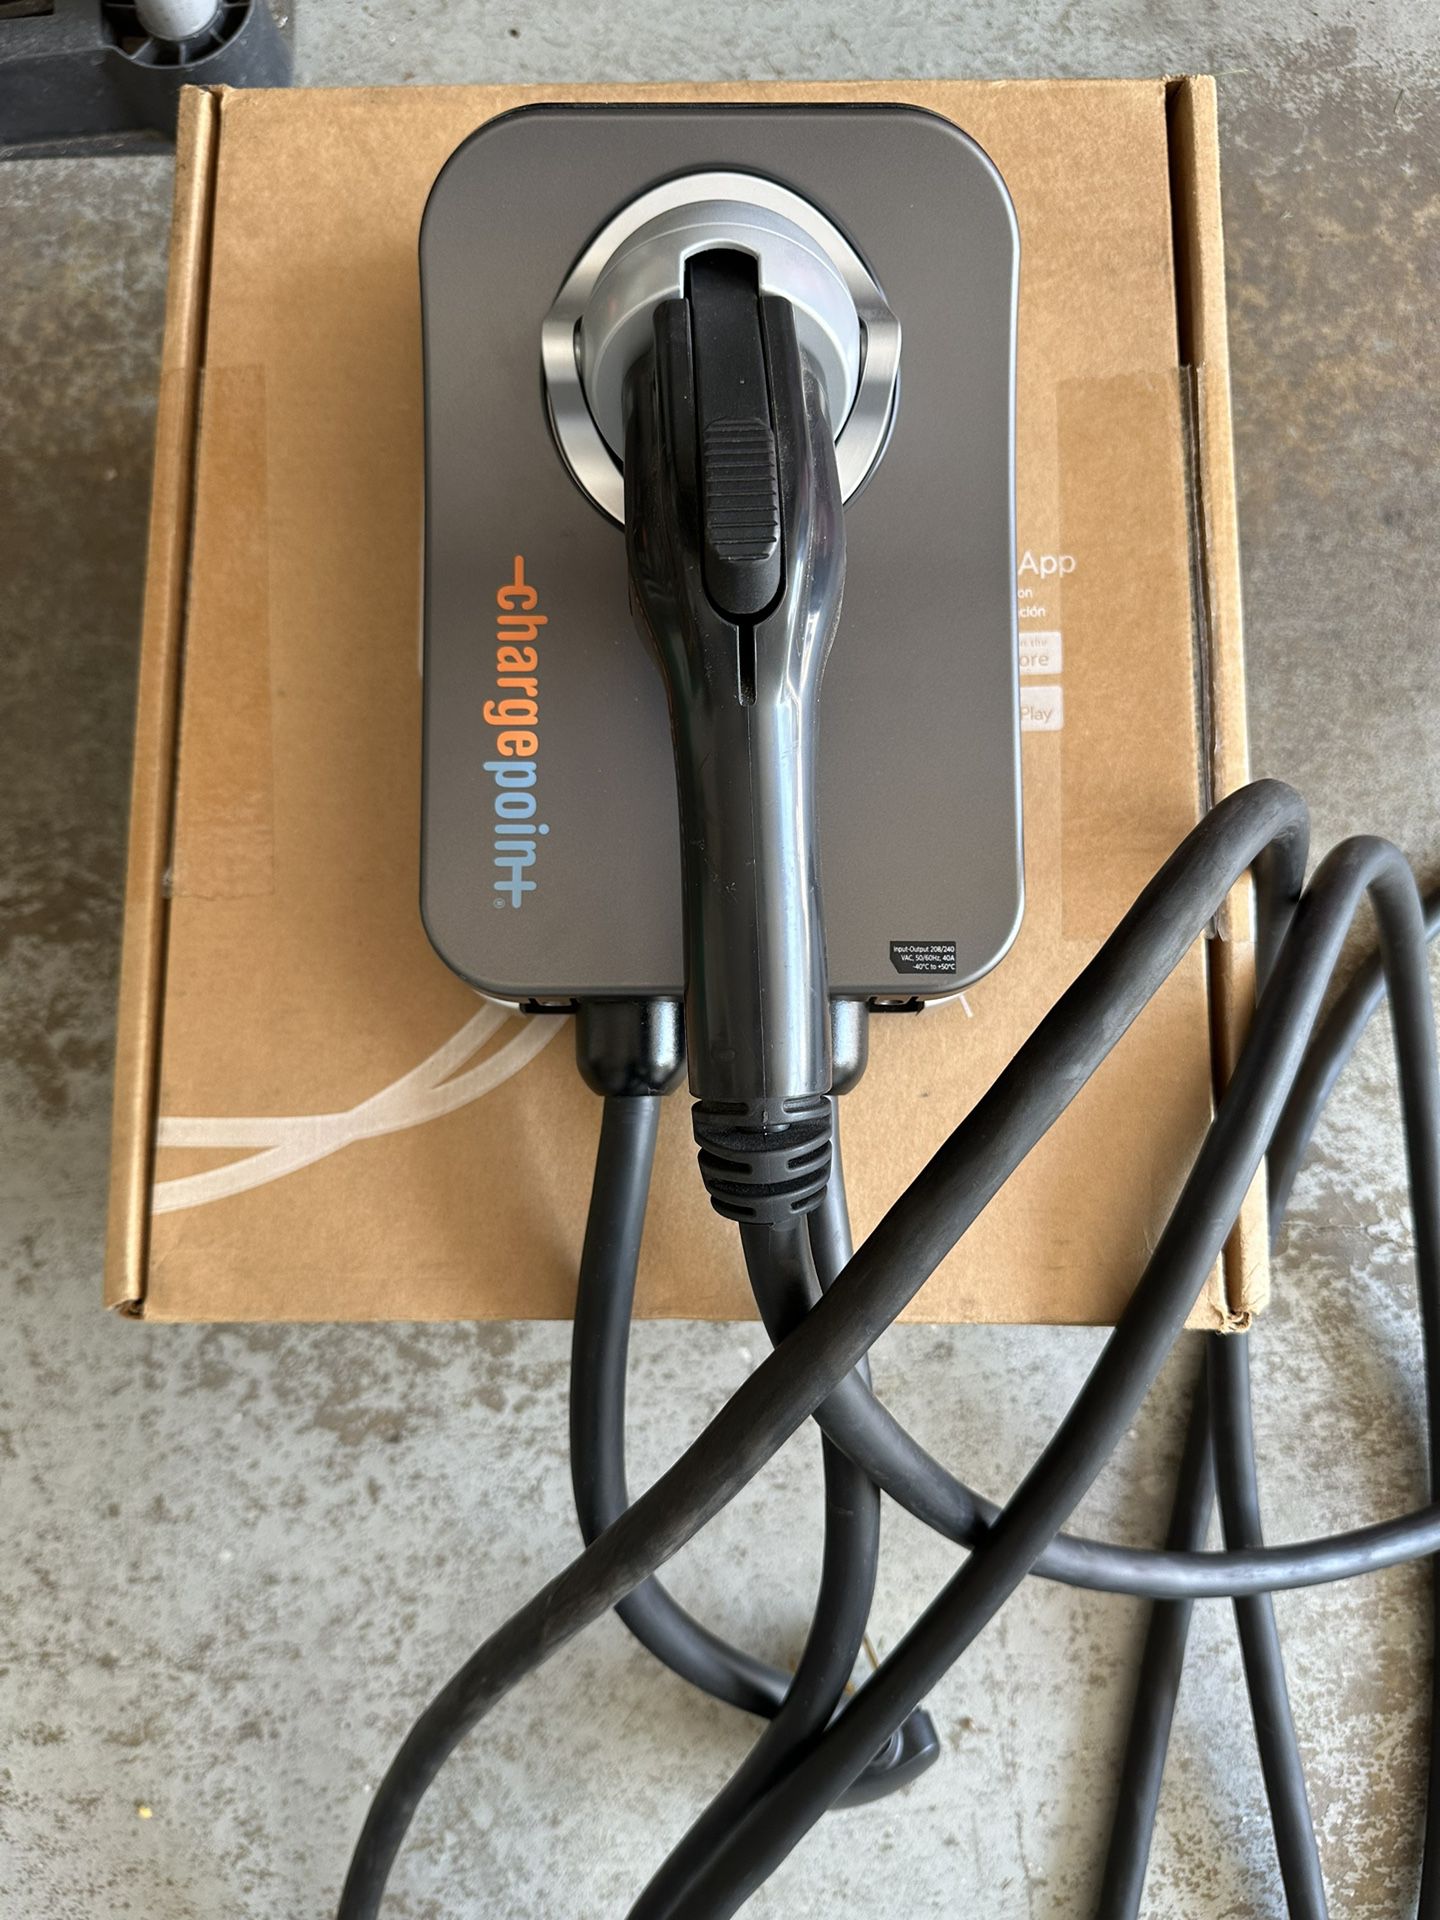 ChargePoint Home Flex Level 2 EV Charger, NEMA 14-50 Outlet 240V EV Charge Station, Electric Vehicle Charging Equipment Compatible with All EV Models